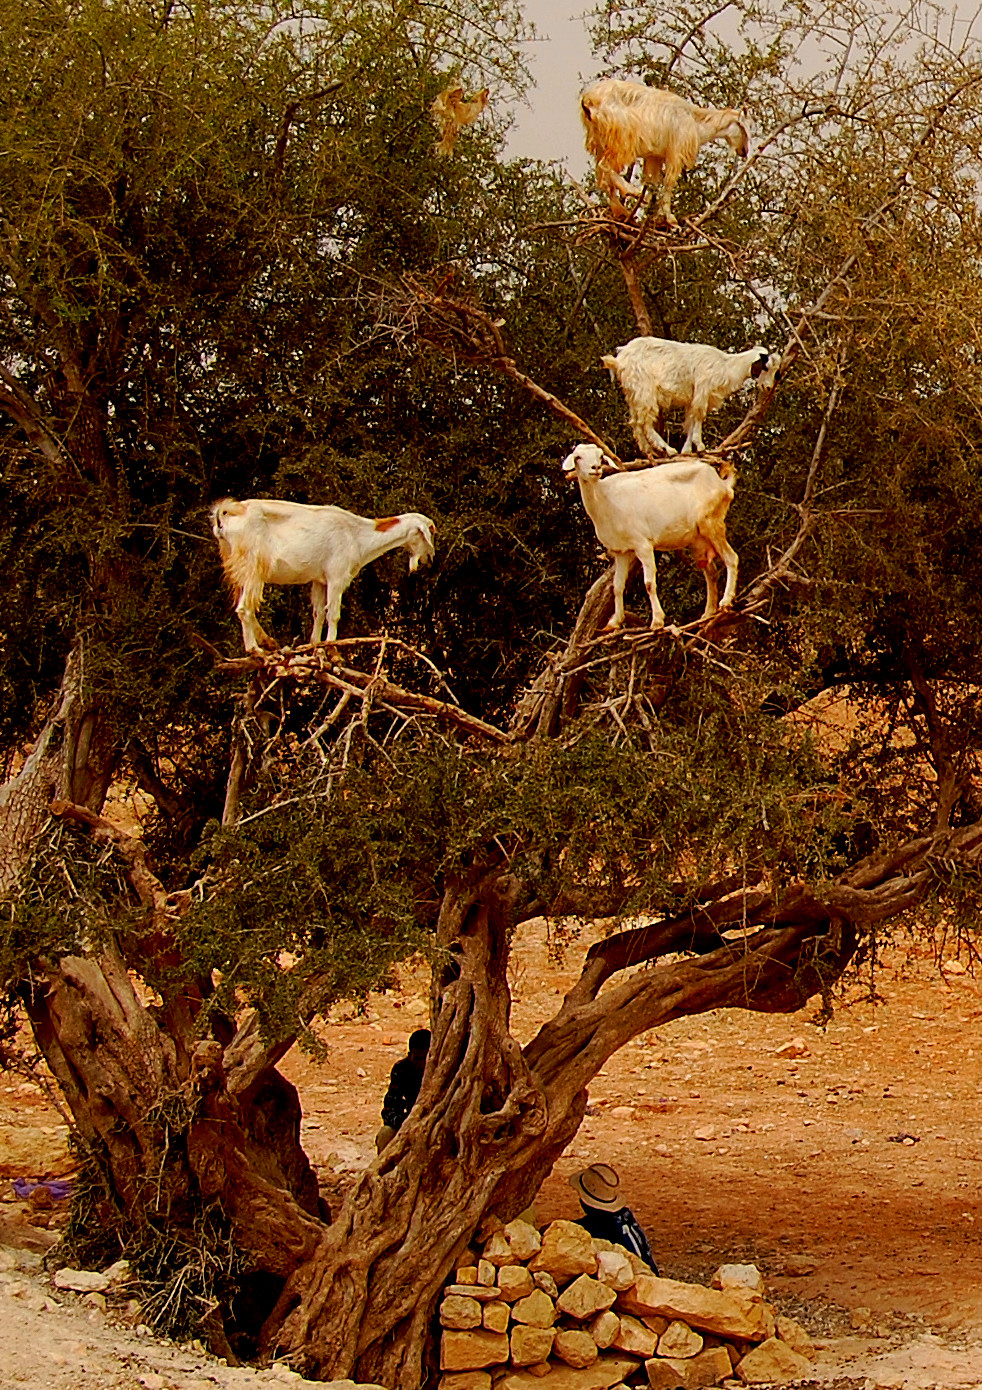 Morocco: delicious goats of thorny Argania seeds...